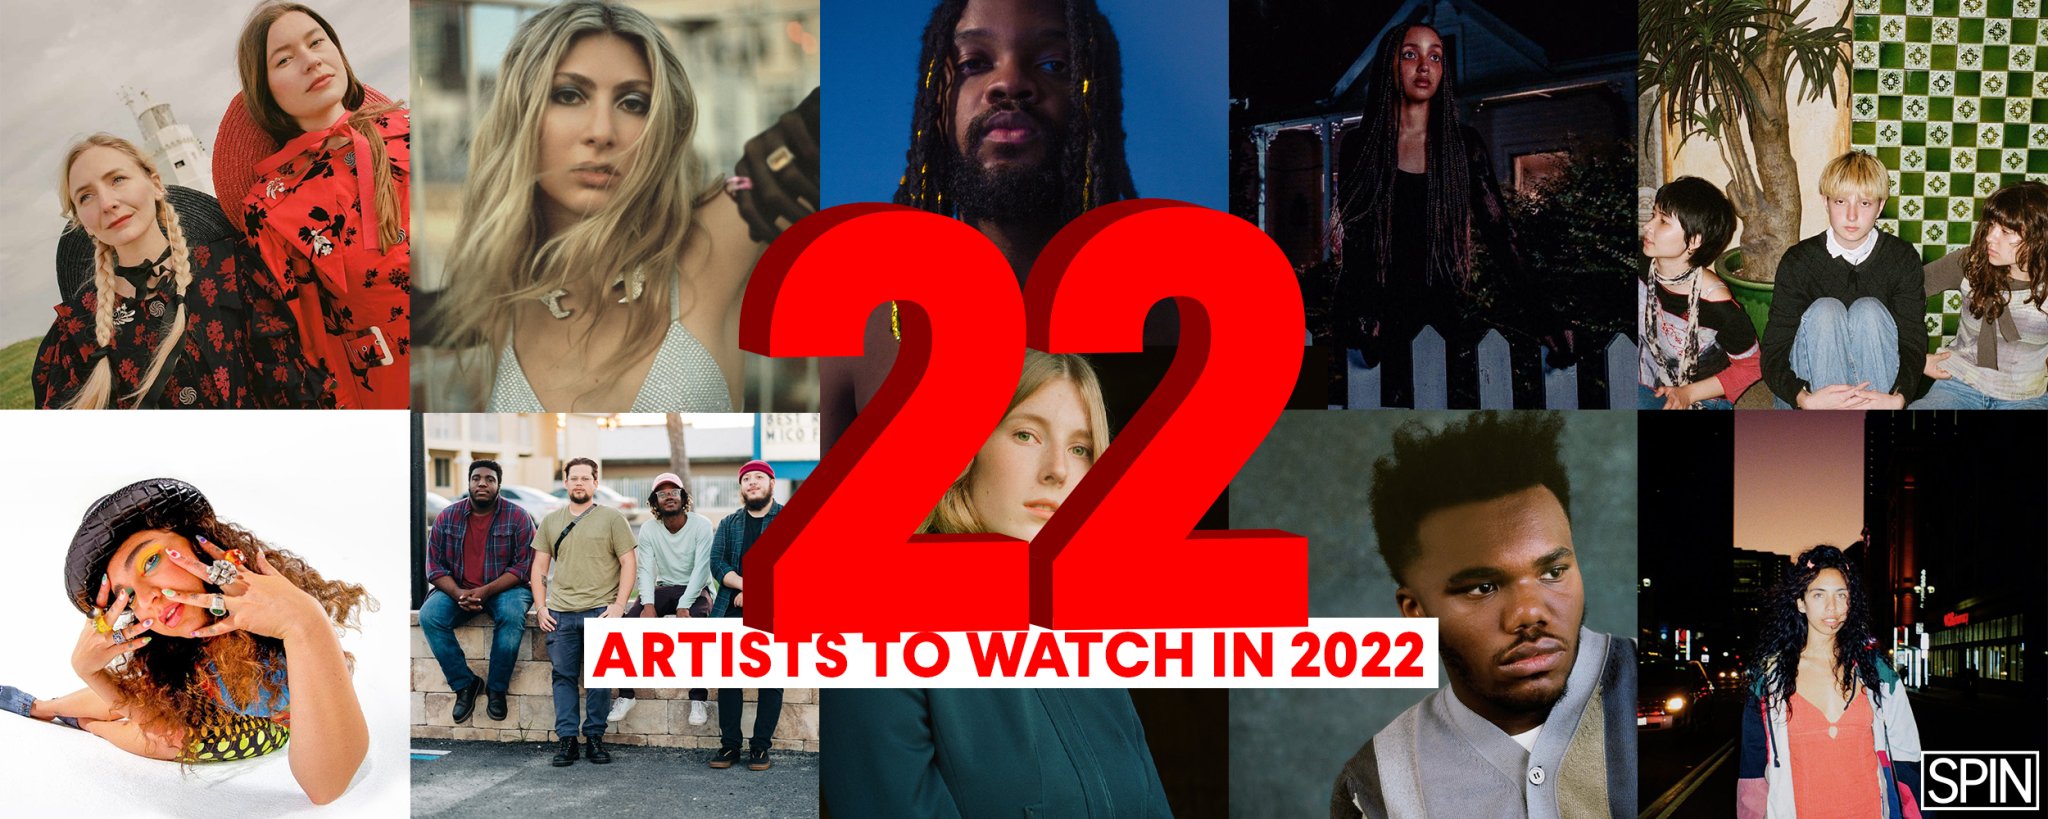 22 Artists to Watch in 2022 - SPIN